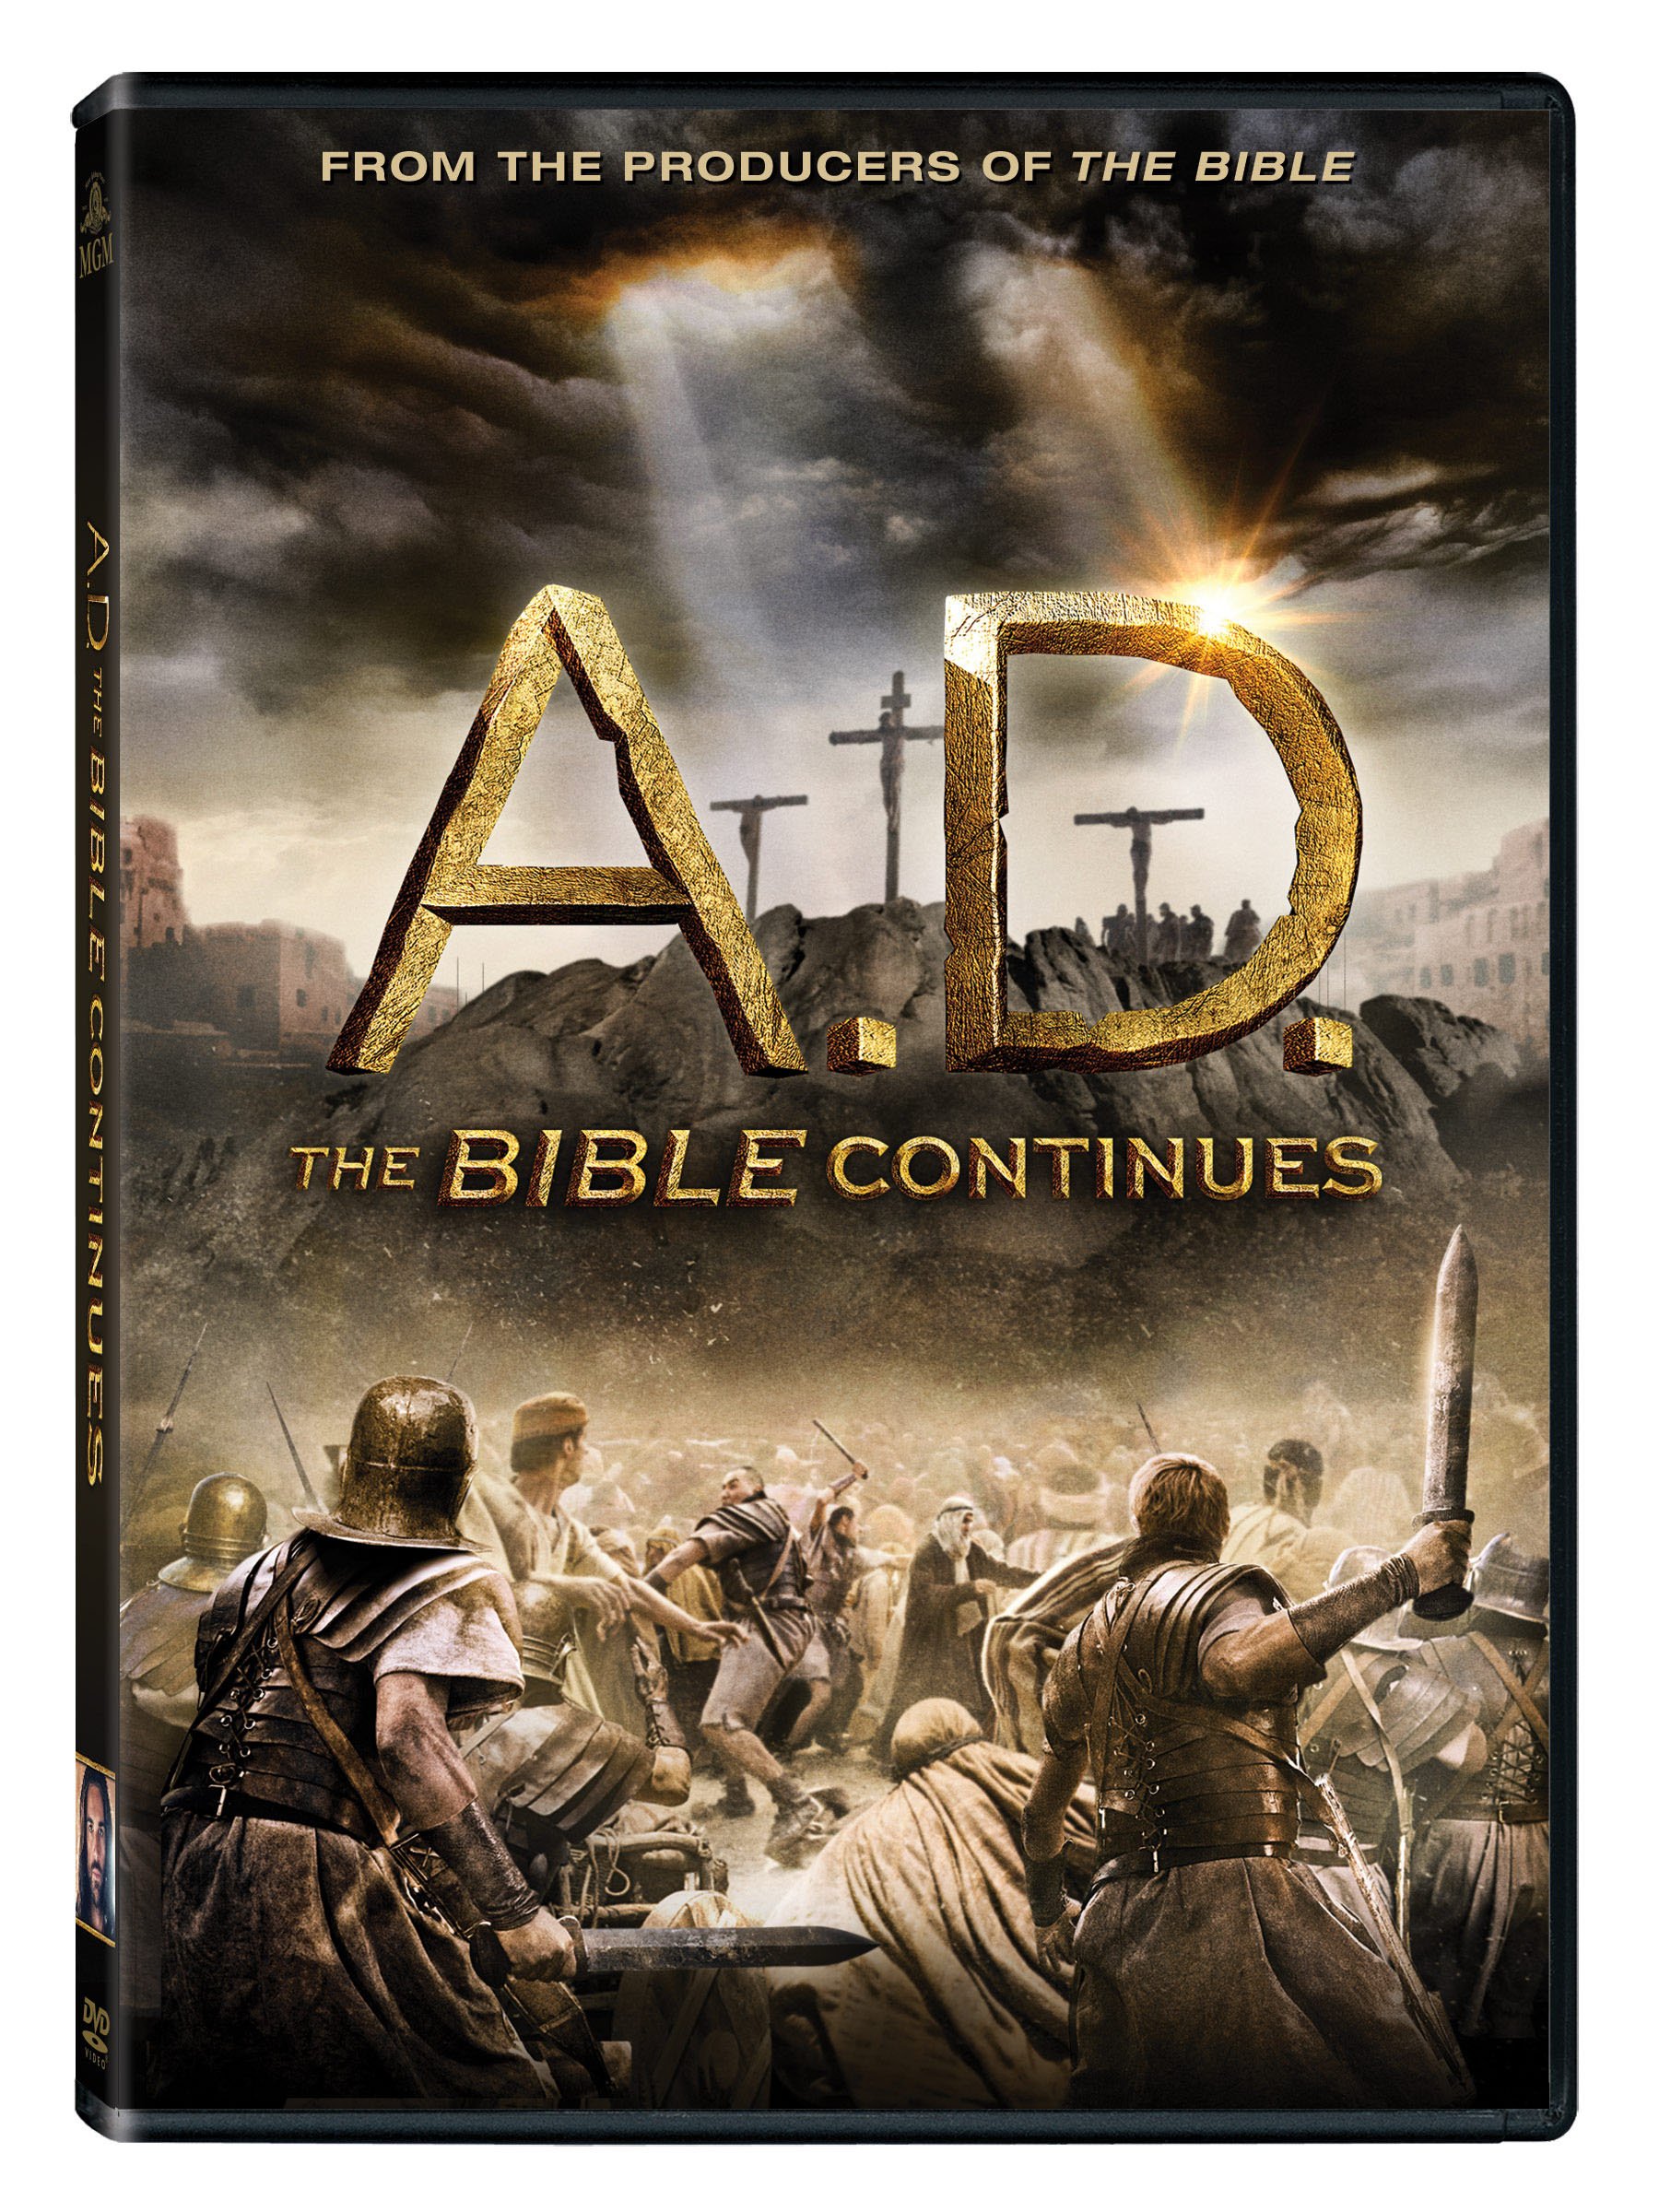 a-d-the-bible-continues-4-disc-box-set-movie-purchase-or-watch-onli